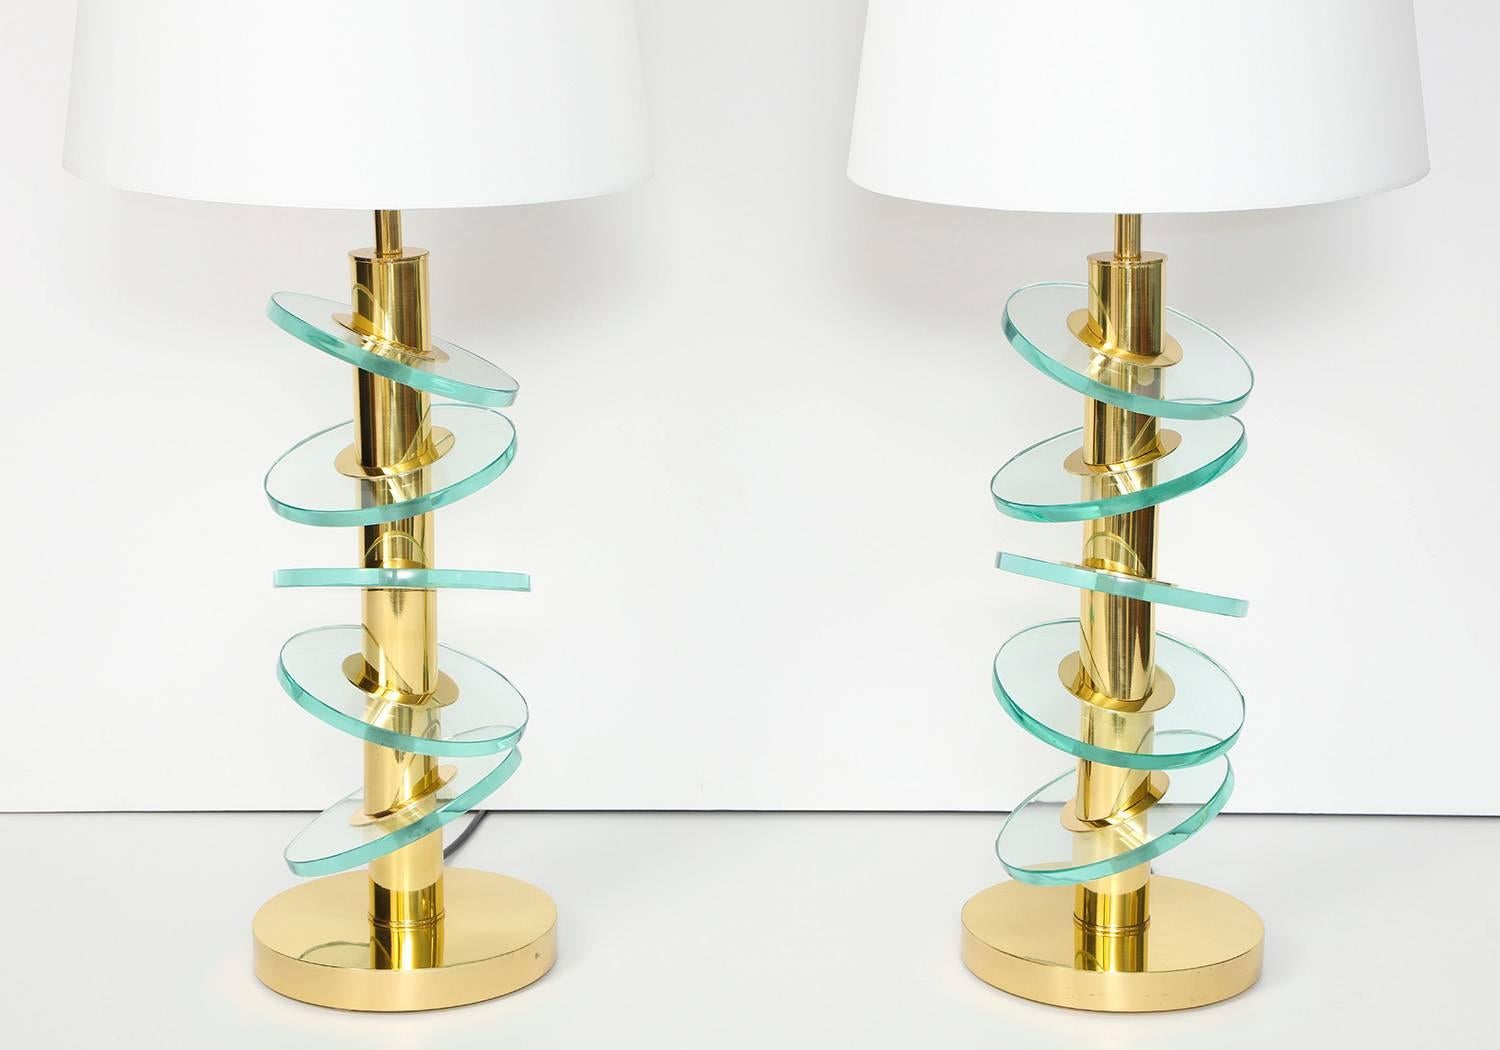 Studio-made table lamps by Fedele Papagni. Segmented brass columns engineered to connect with angled glass discs. Meticulous construction imbued with a playful spirit. Each lamp has two candelabra sockets concealed by paper shades. Made to order,